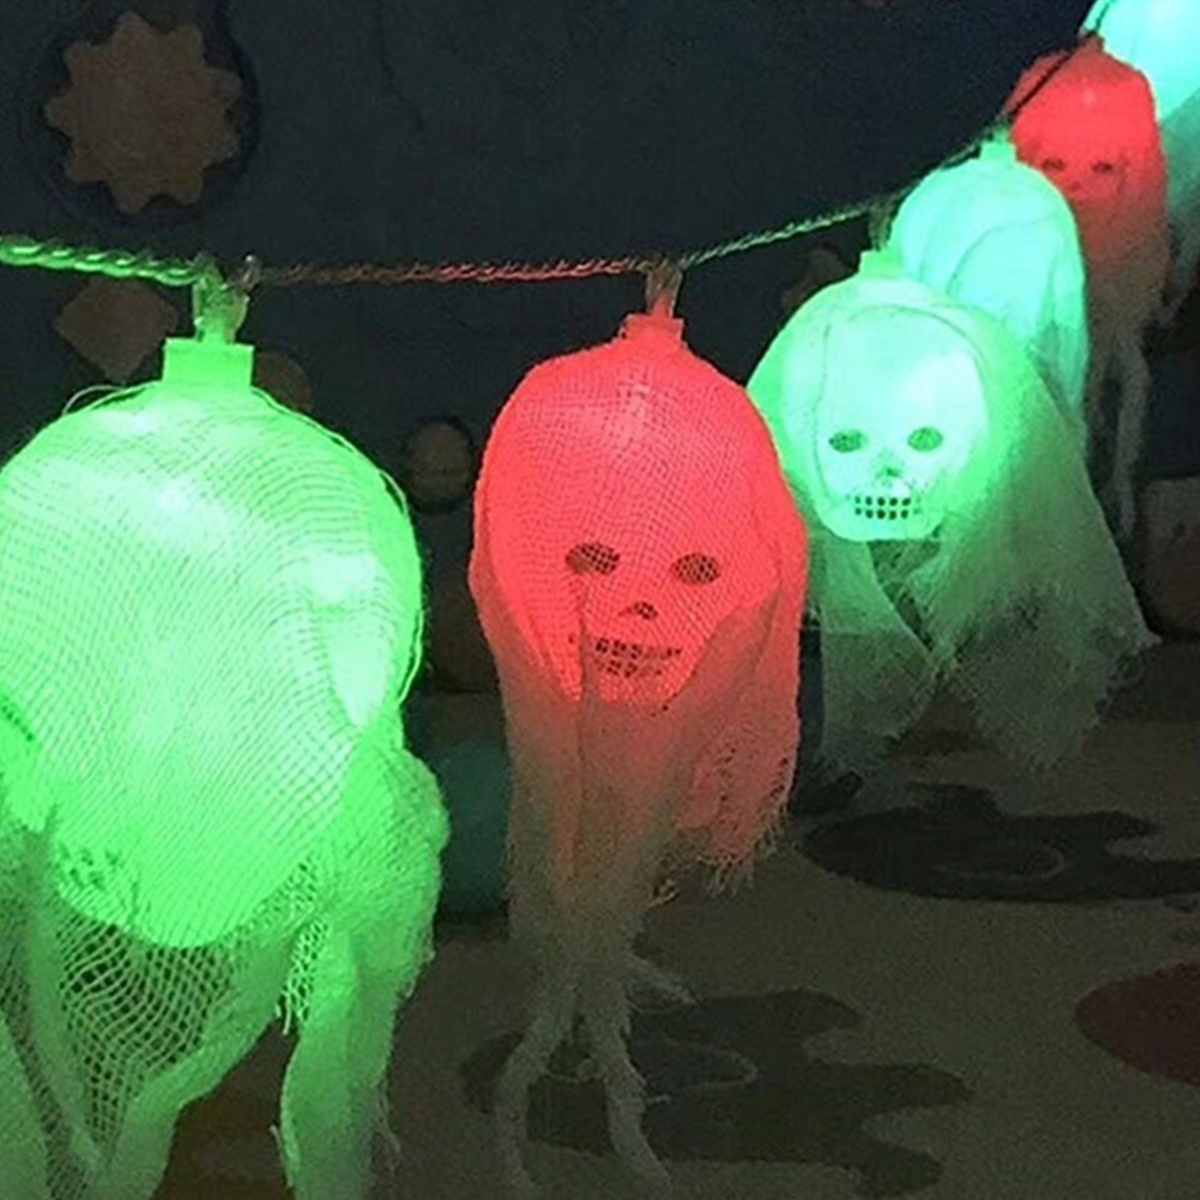 25M-Battery-Powered-10-LED-Skull-String-Light-Decoration-Lamp-for-Halloween-Ghost-Party-Decor-1549748-3